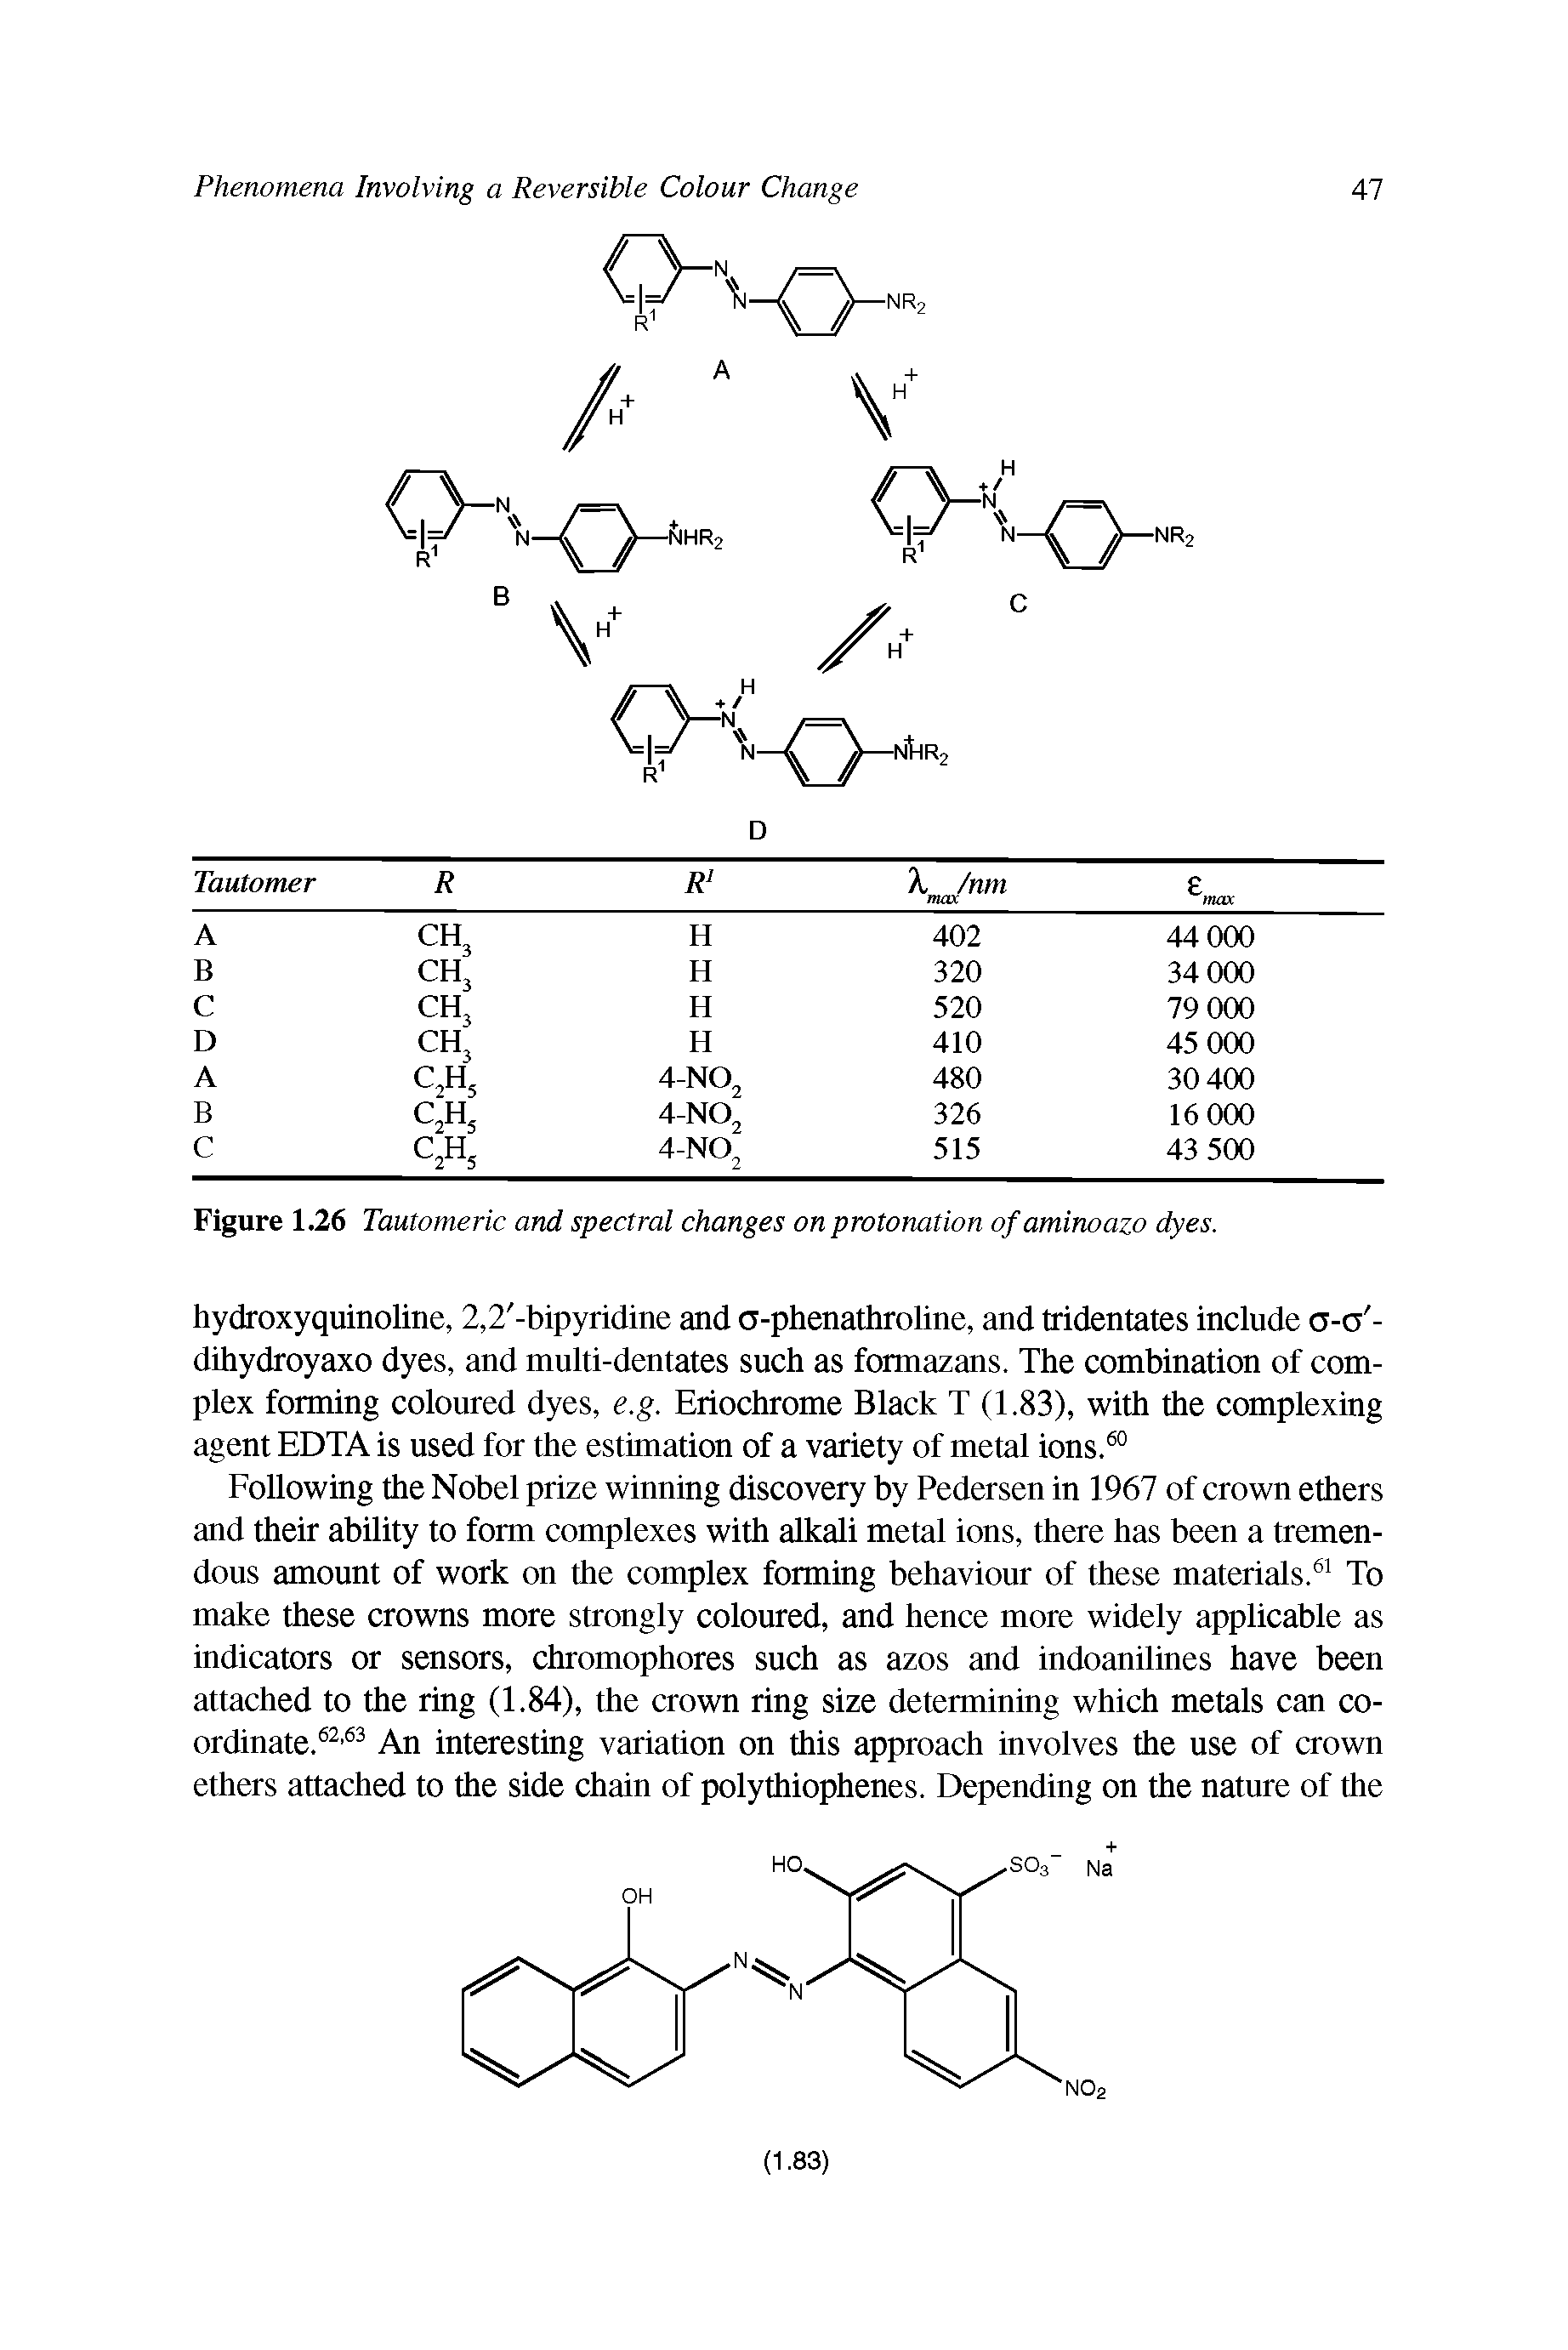 Figure 1.26 Tautomeric and spectral changes on protonation of aminoazo dyes.